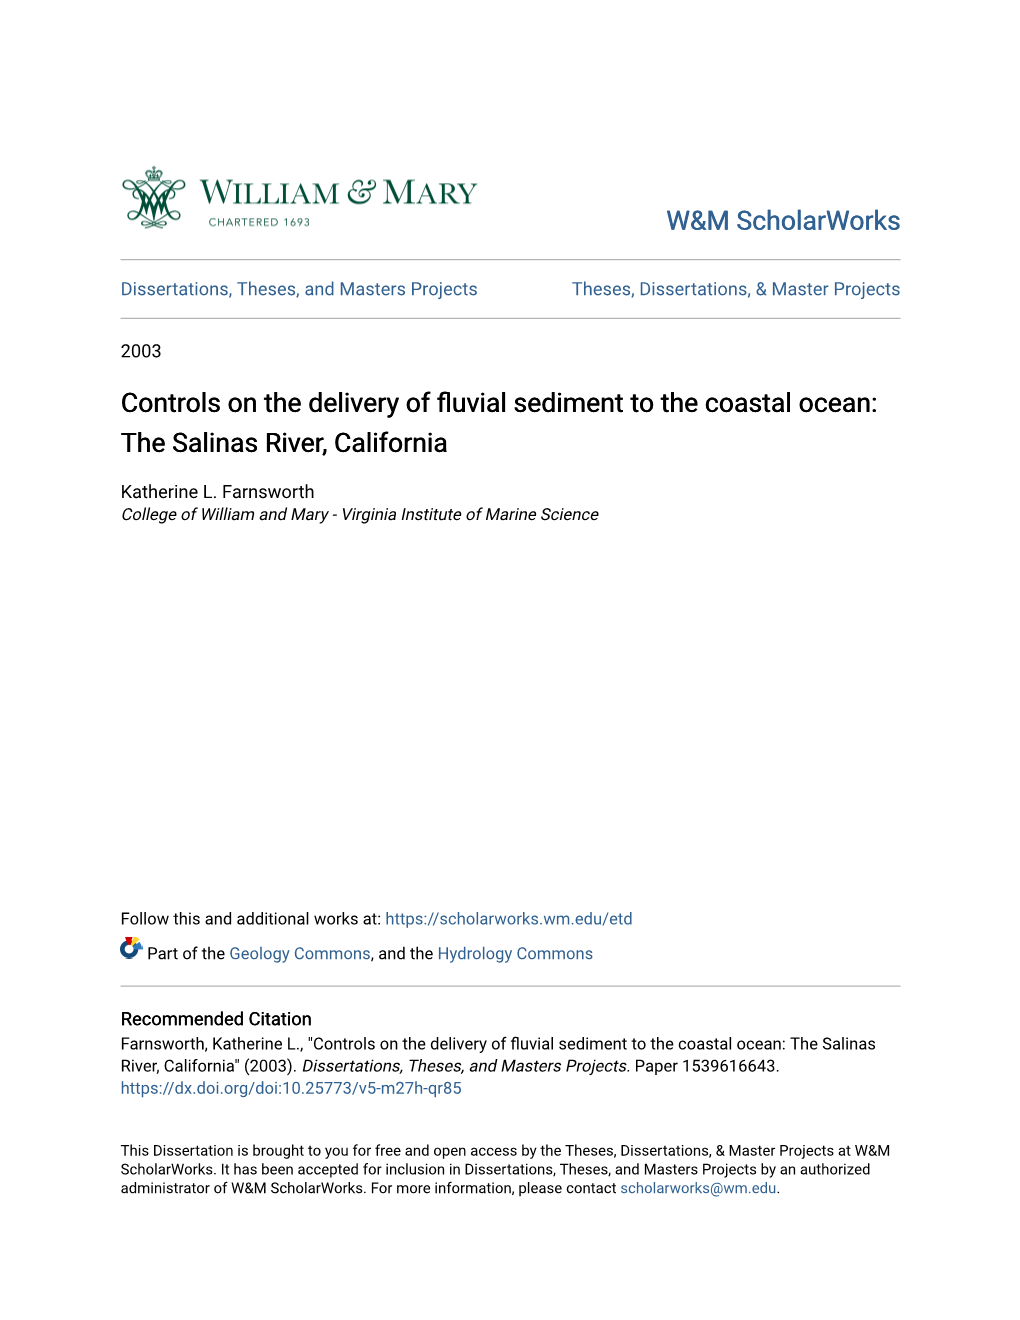 Controls on the Delivery of Fluvial Sediment to the Coastal Ocean: the Salinas River, California